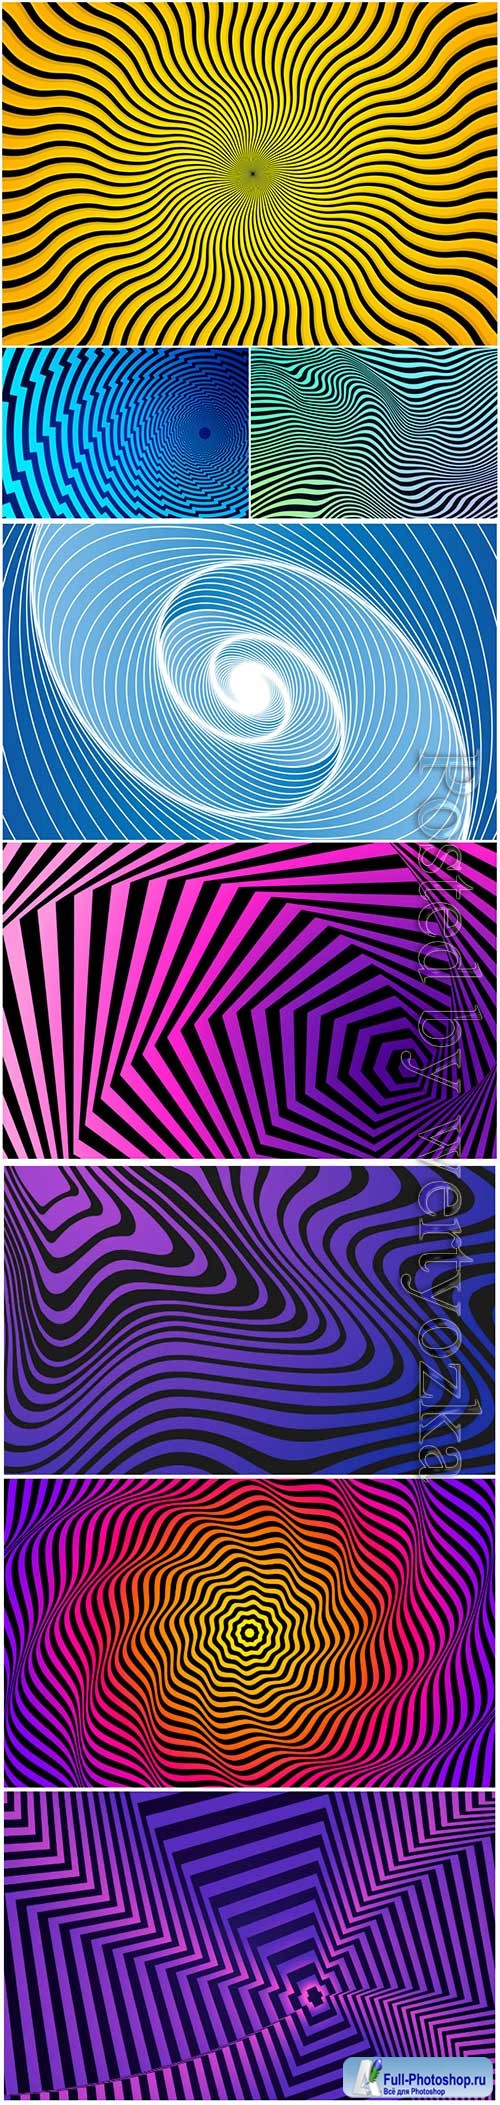 Psychedelic optical illusion vector background # 5